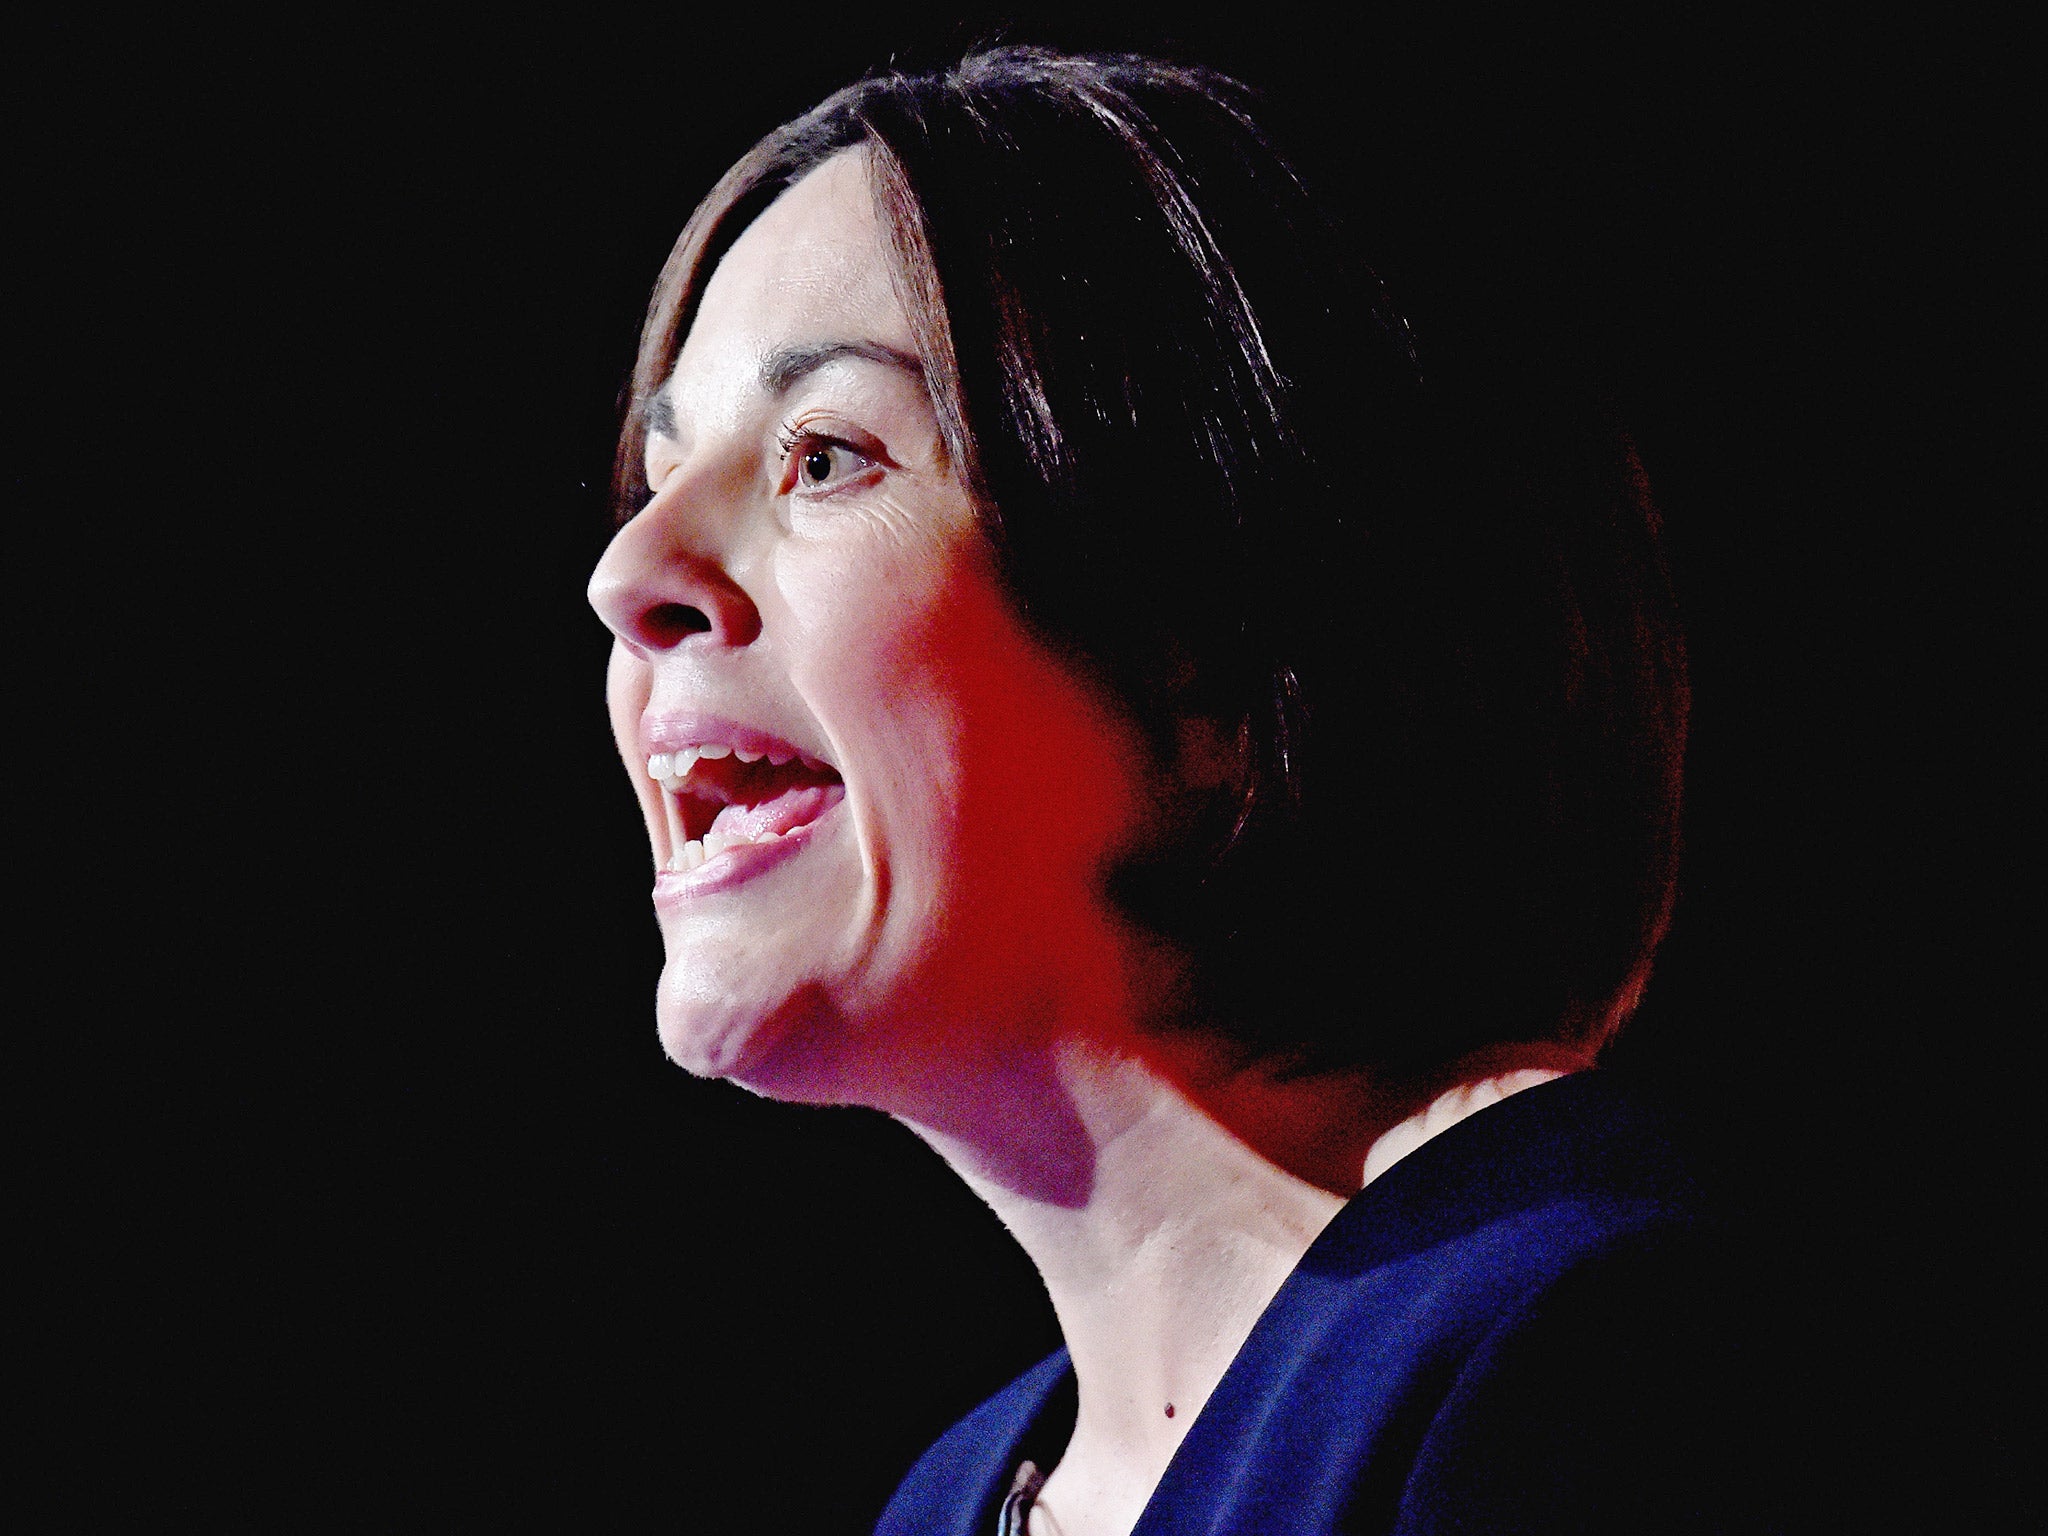 The Scottish Labour leader, Kezia Dugdale, revealed that her partner is female this weekend.